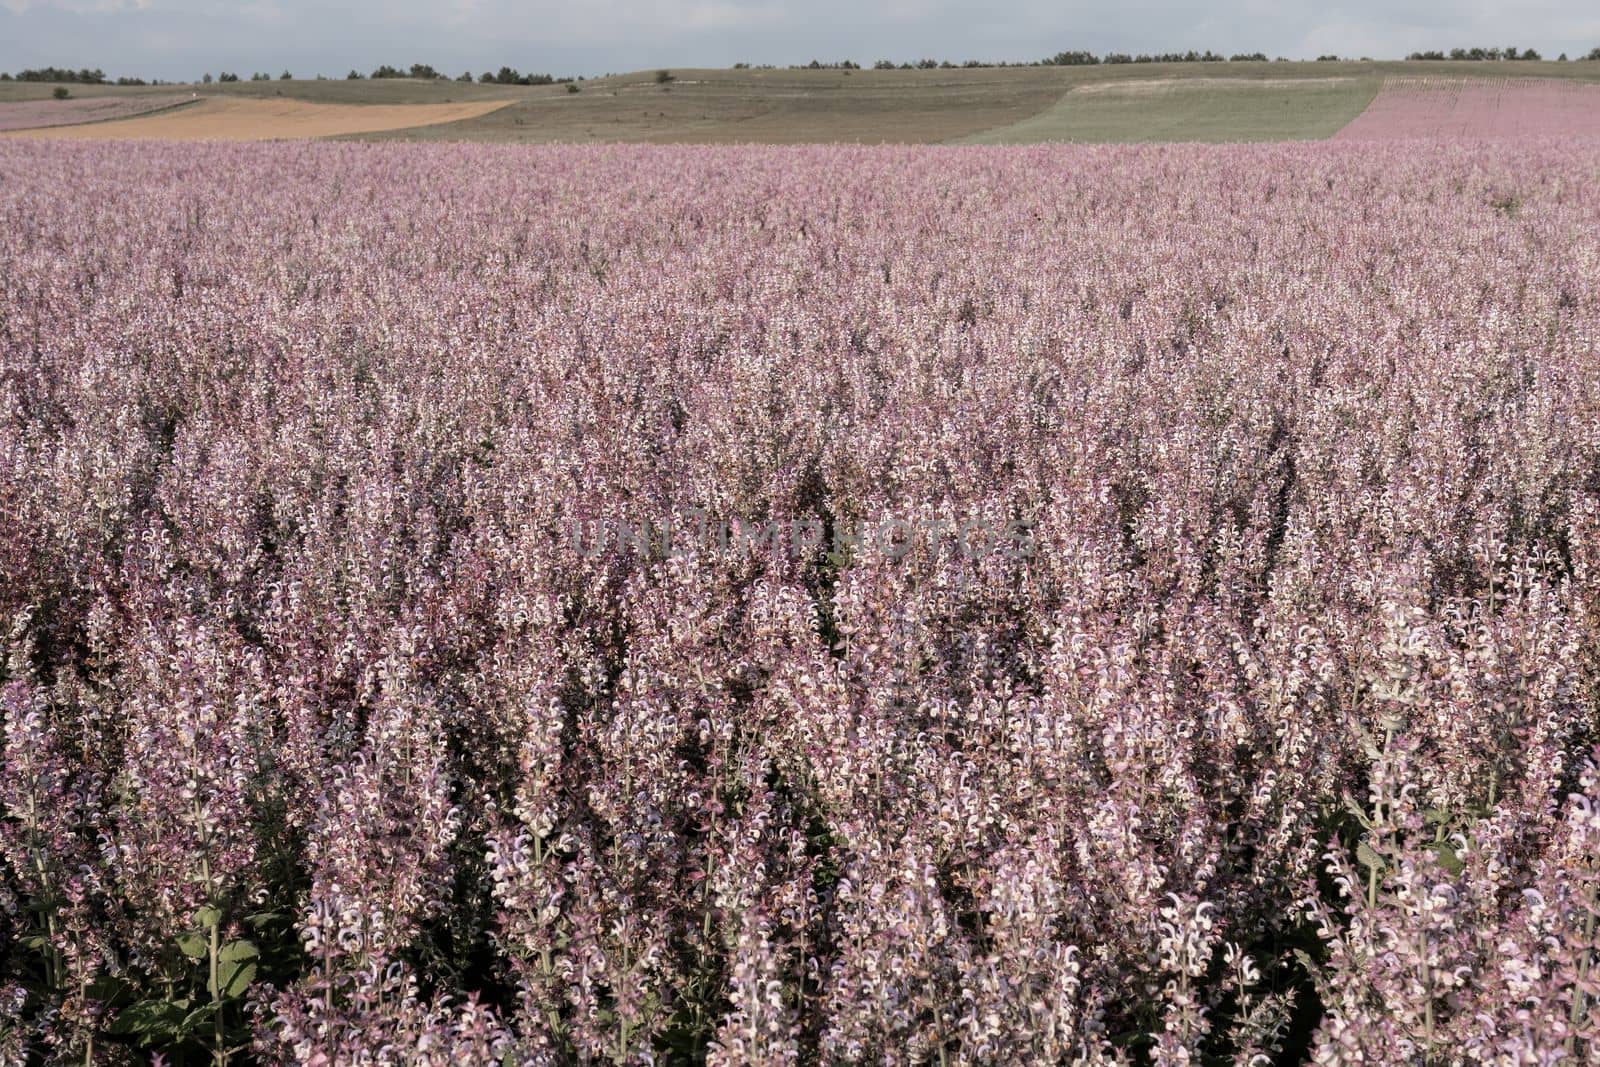 Field of Clary sage - Salvia Sclarea in bloom, cultivated to extract the essential oil and honey. Field with blossom sage plants during golden sunset, relaxing nature view.